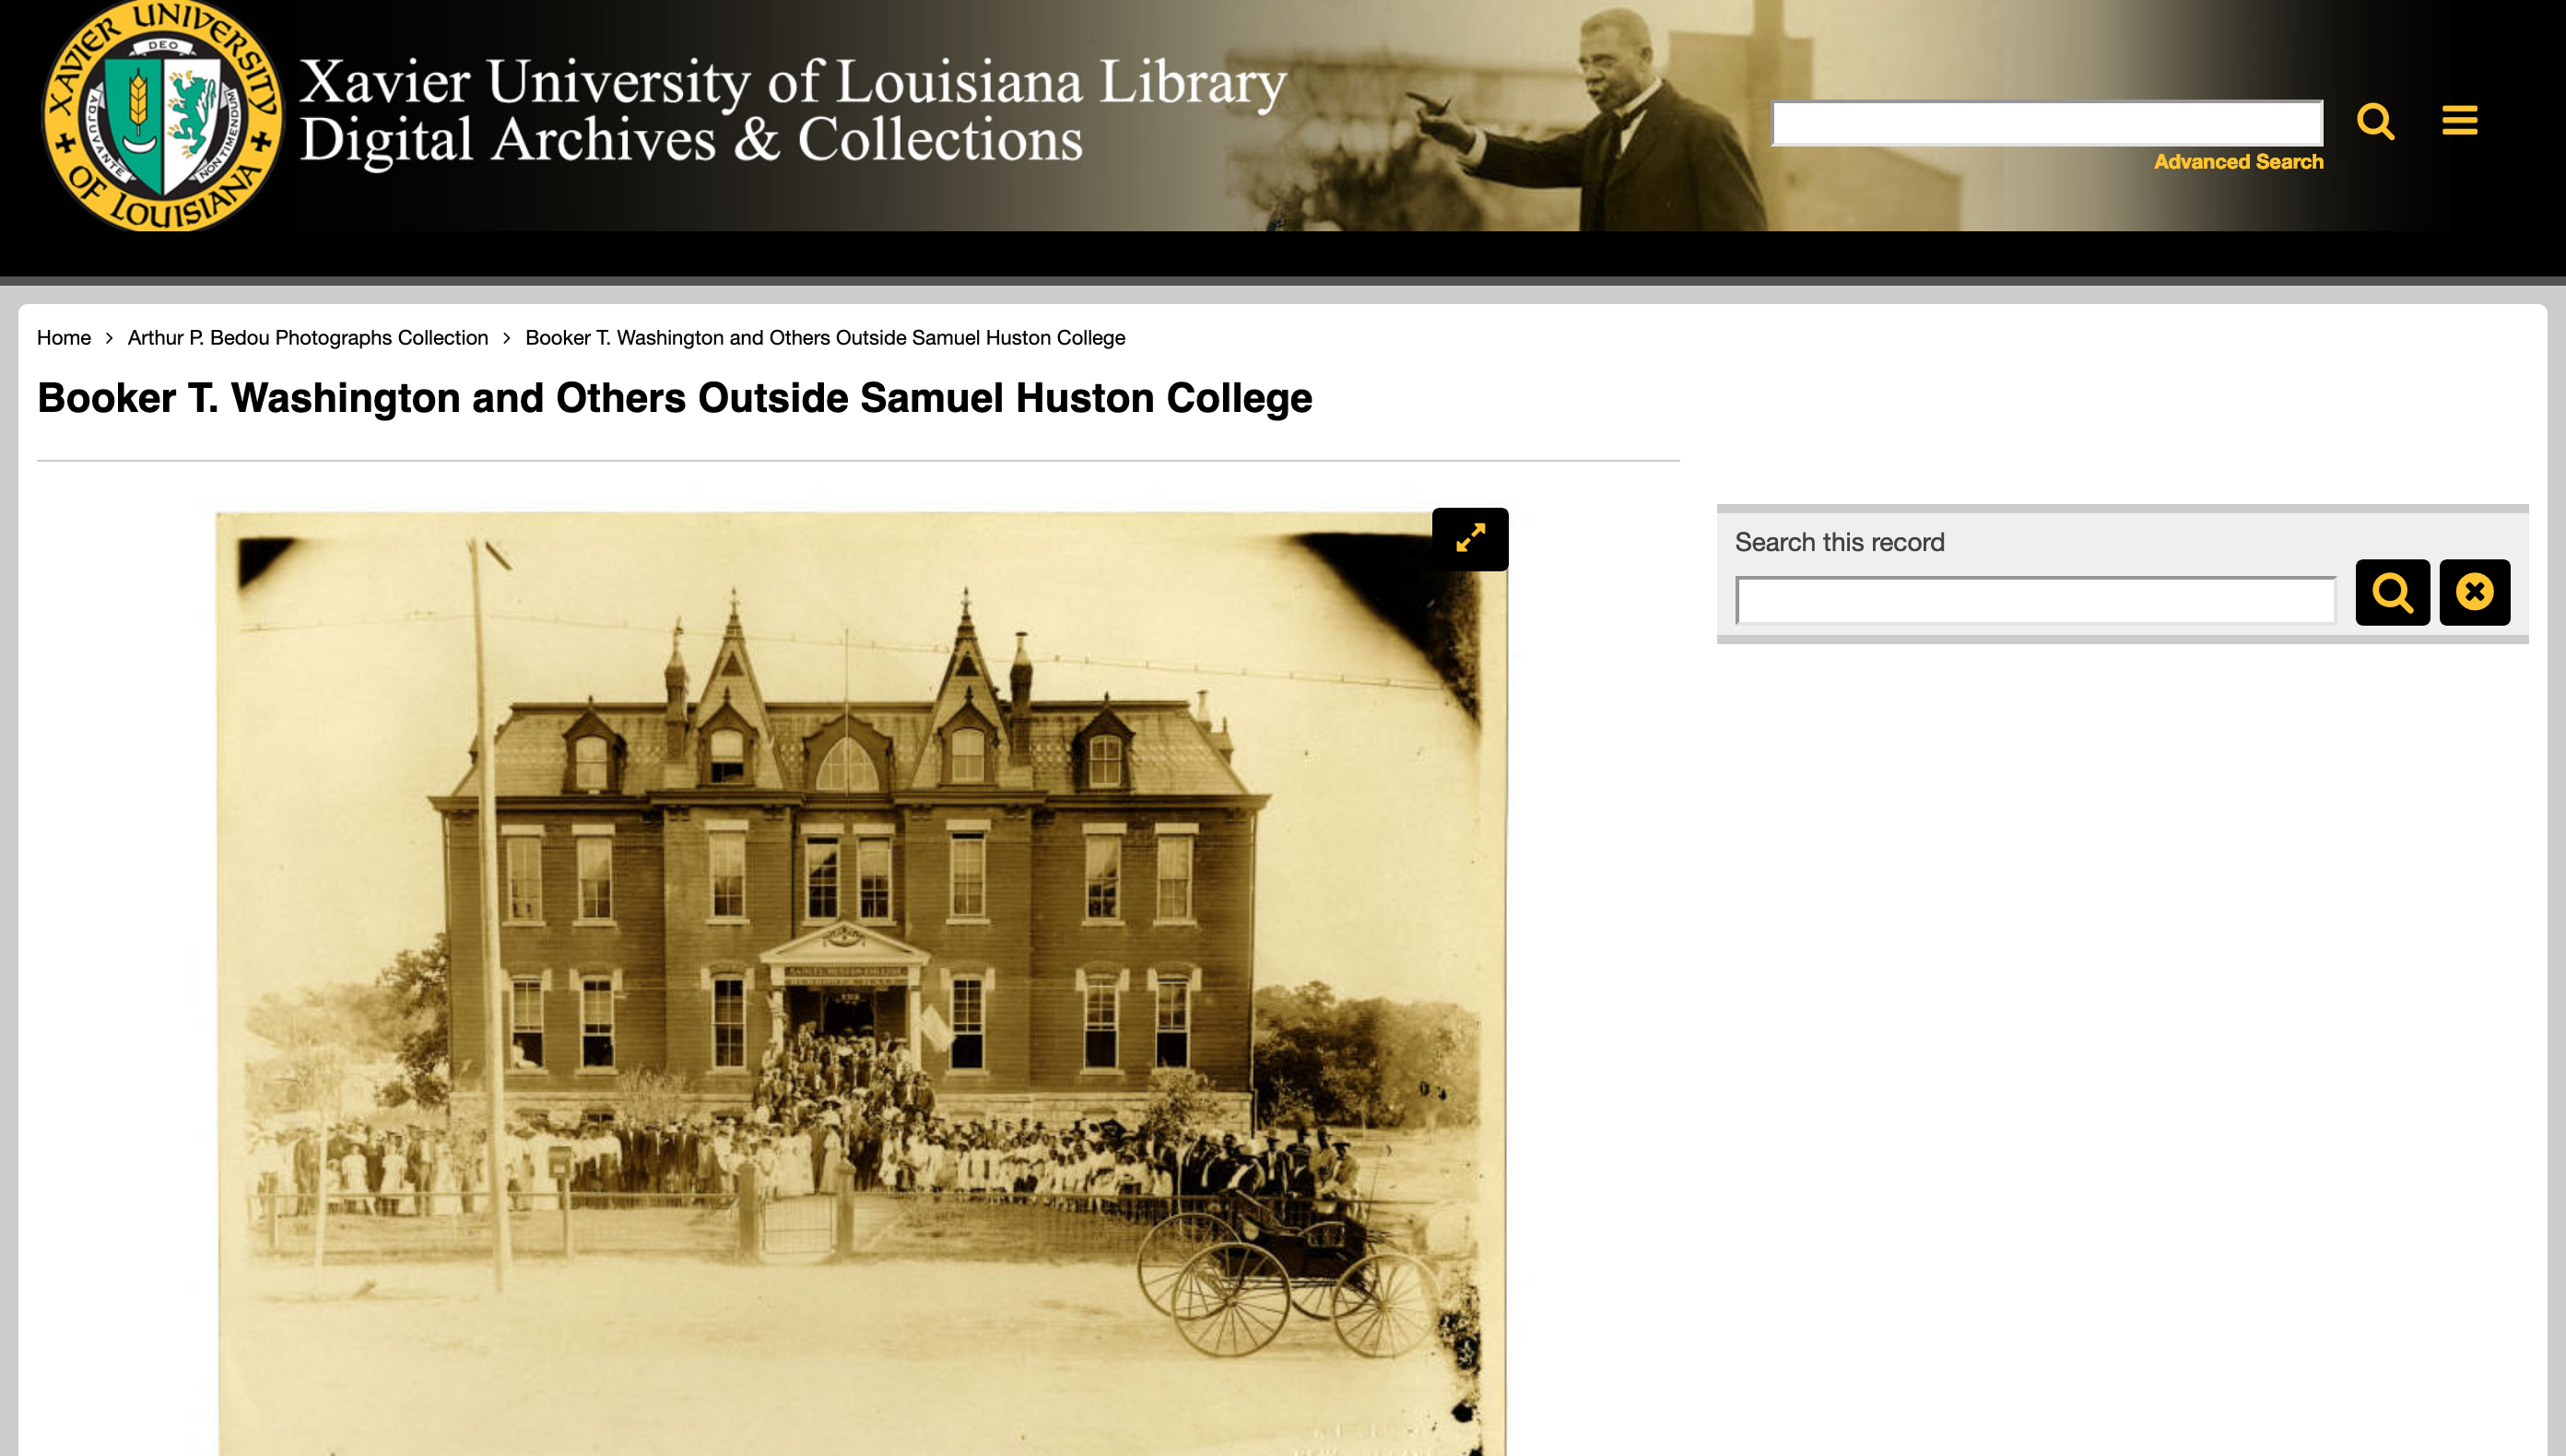 Xavier University of Louisiana Library - Digital Archives & Collections